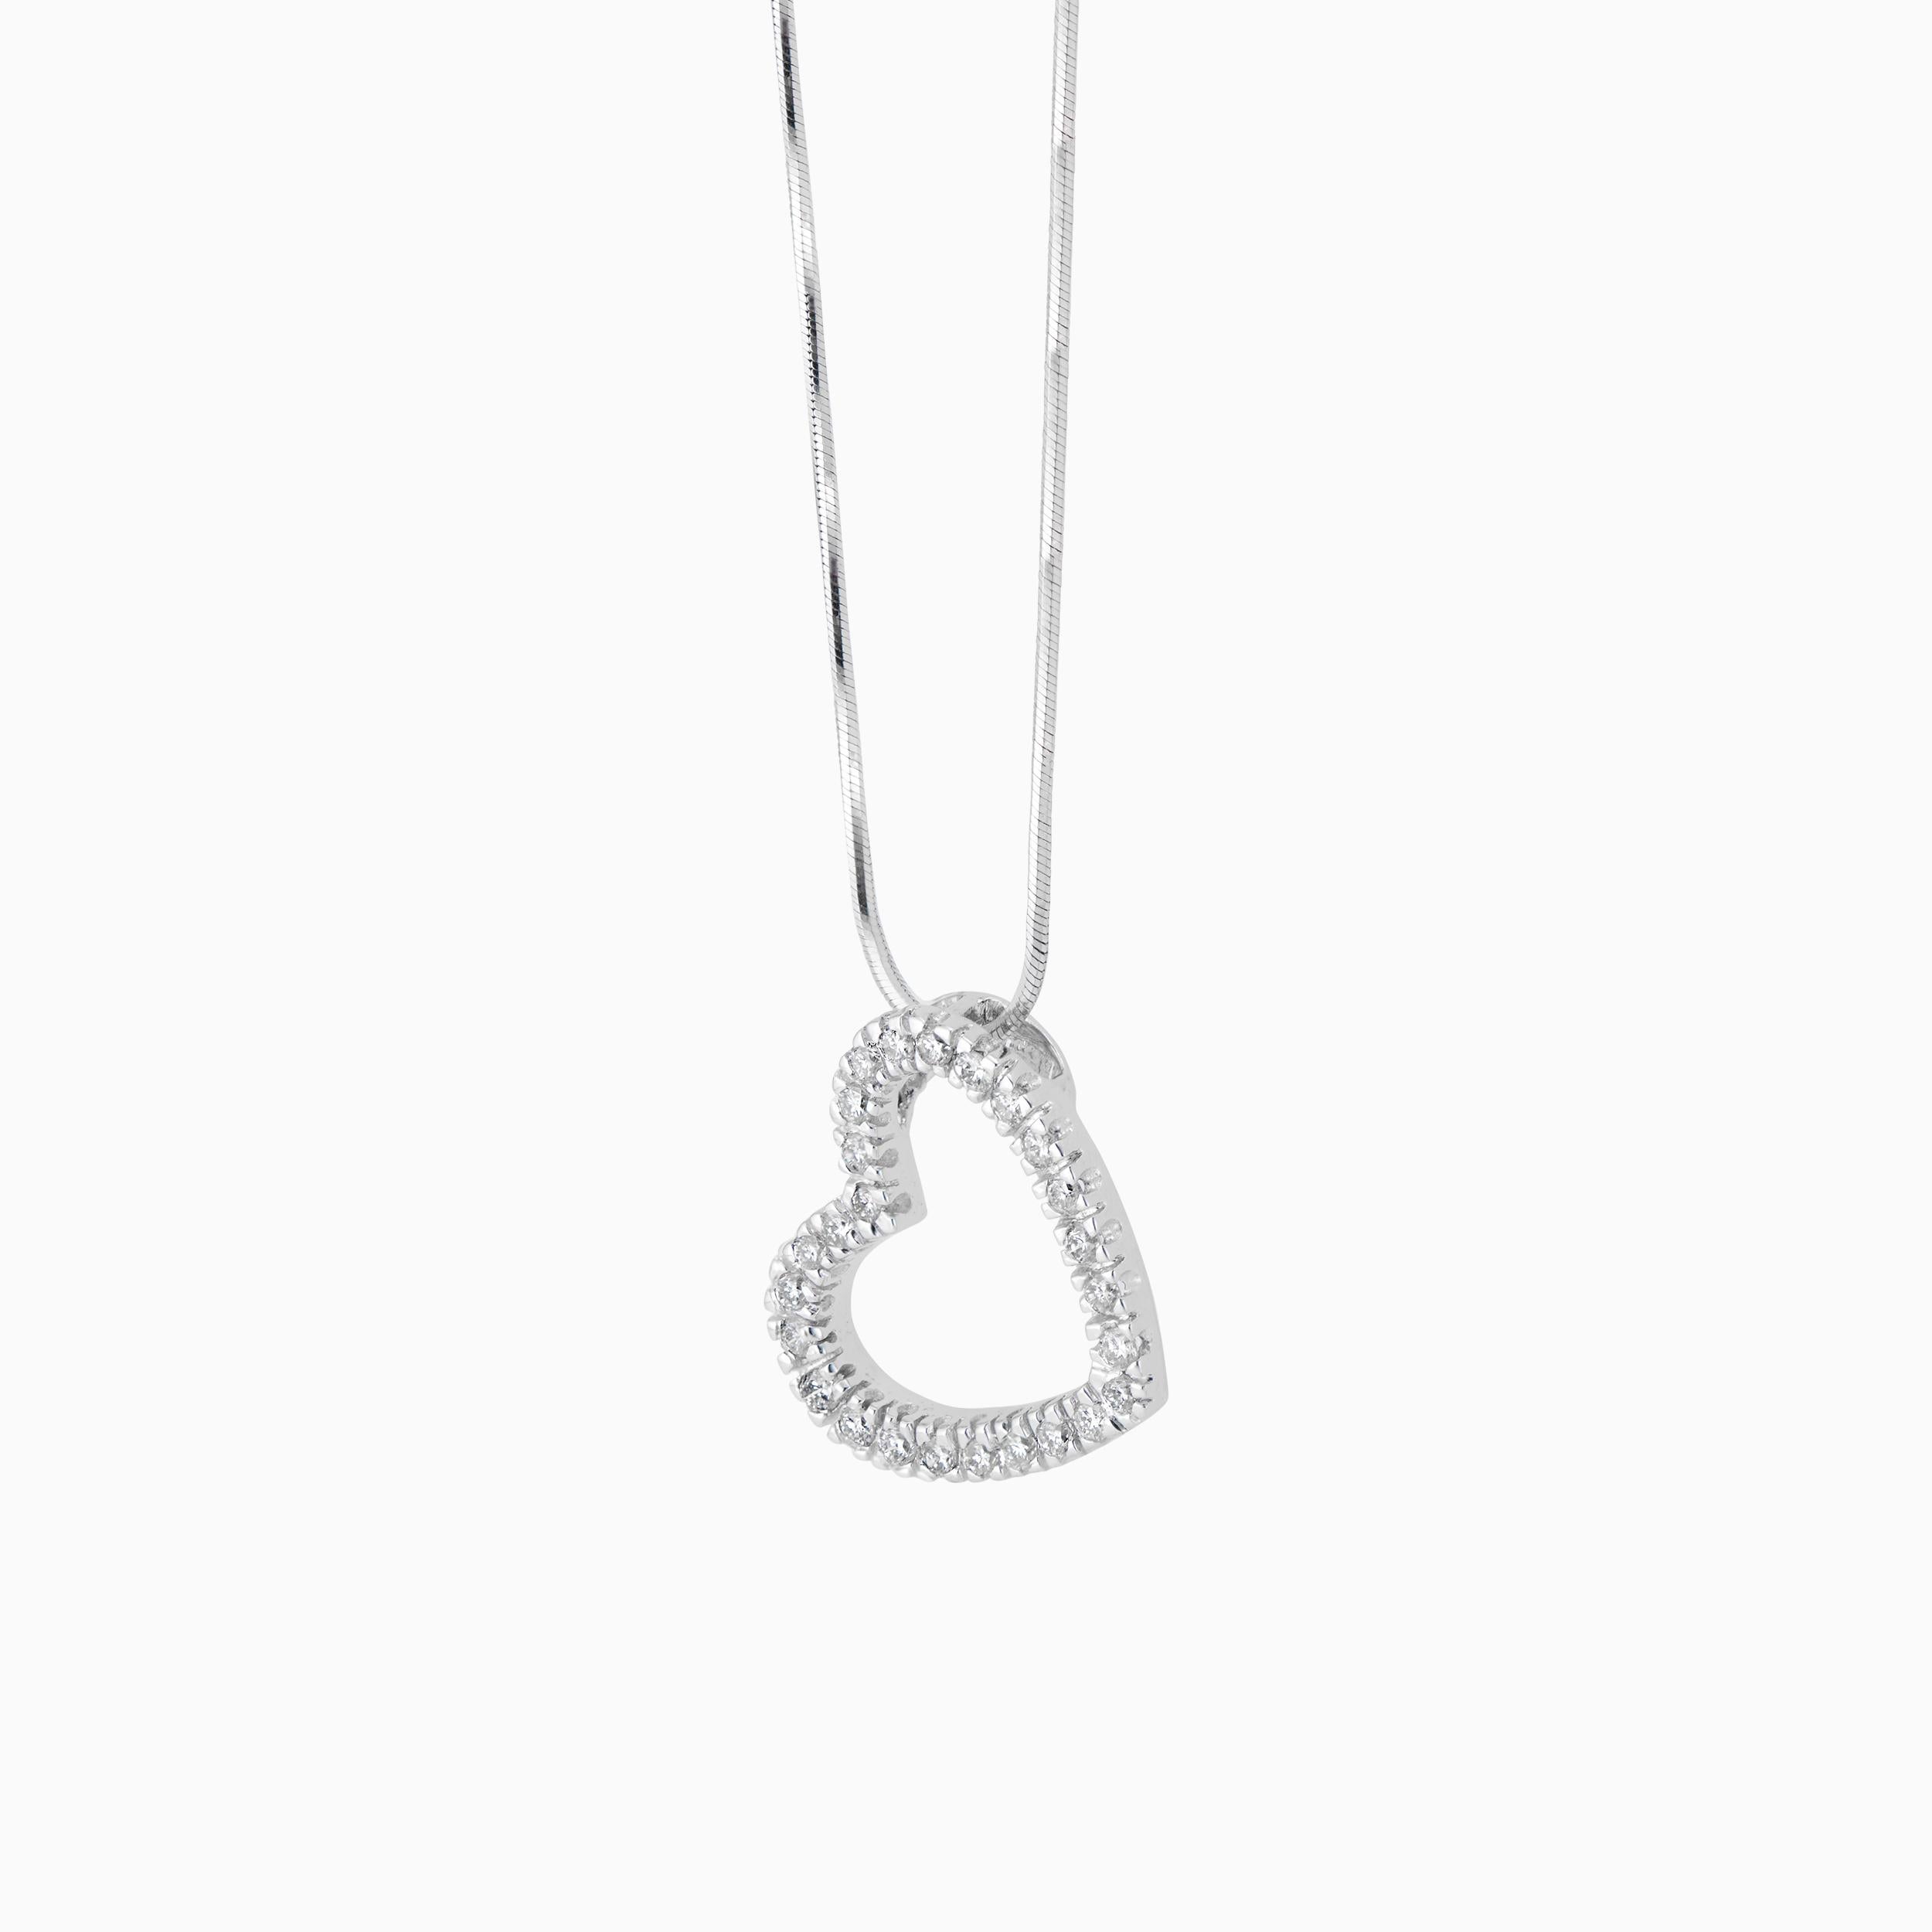 Open-heart pendant necklace set with bright full cut diamonds on a white gold 16 inch square snake chain with lobster catch.

26 round brilliant cut diamonds, I SI approx. .39cts
14k white gold
Stamped: 14k
5.3 grams
Top to bottom: 18.25mm or .75